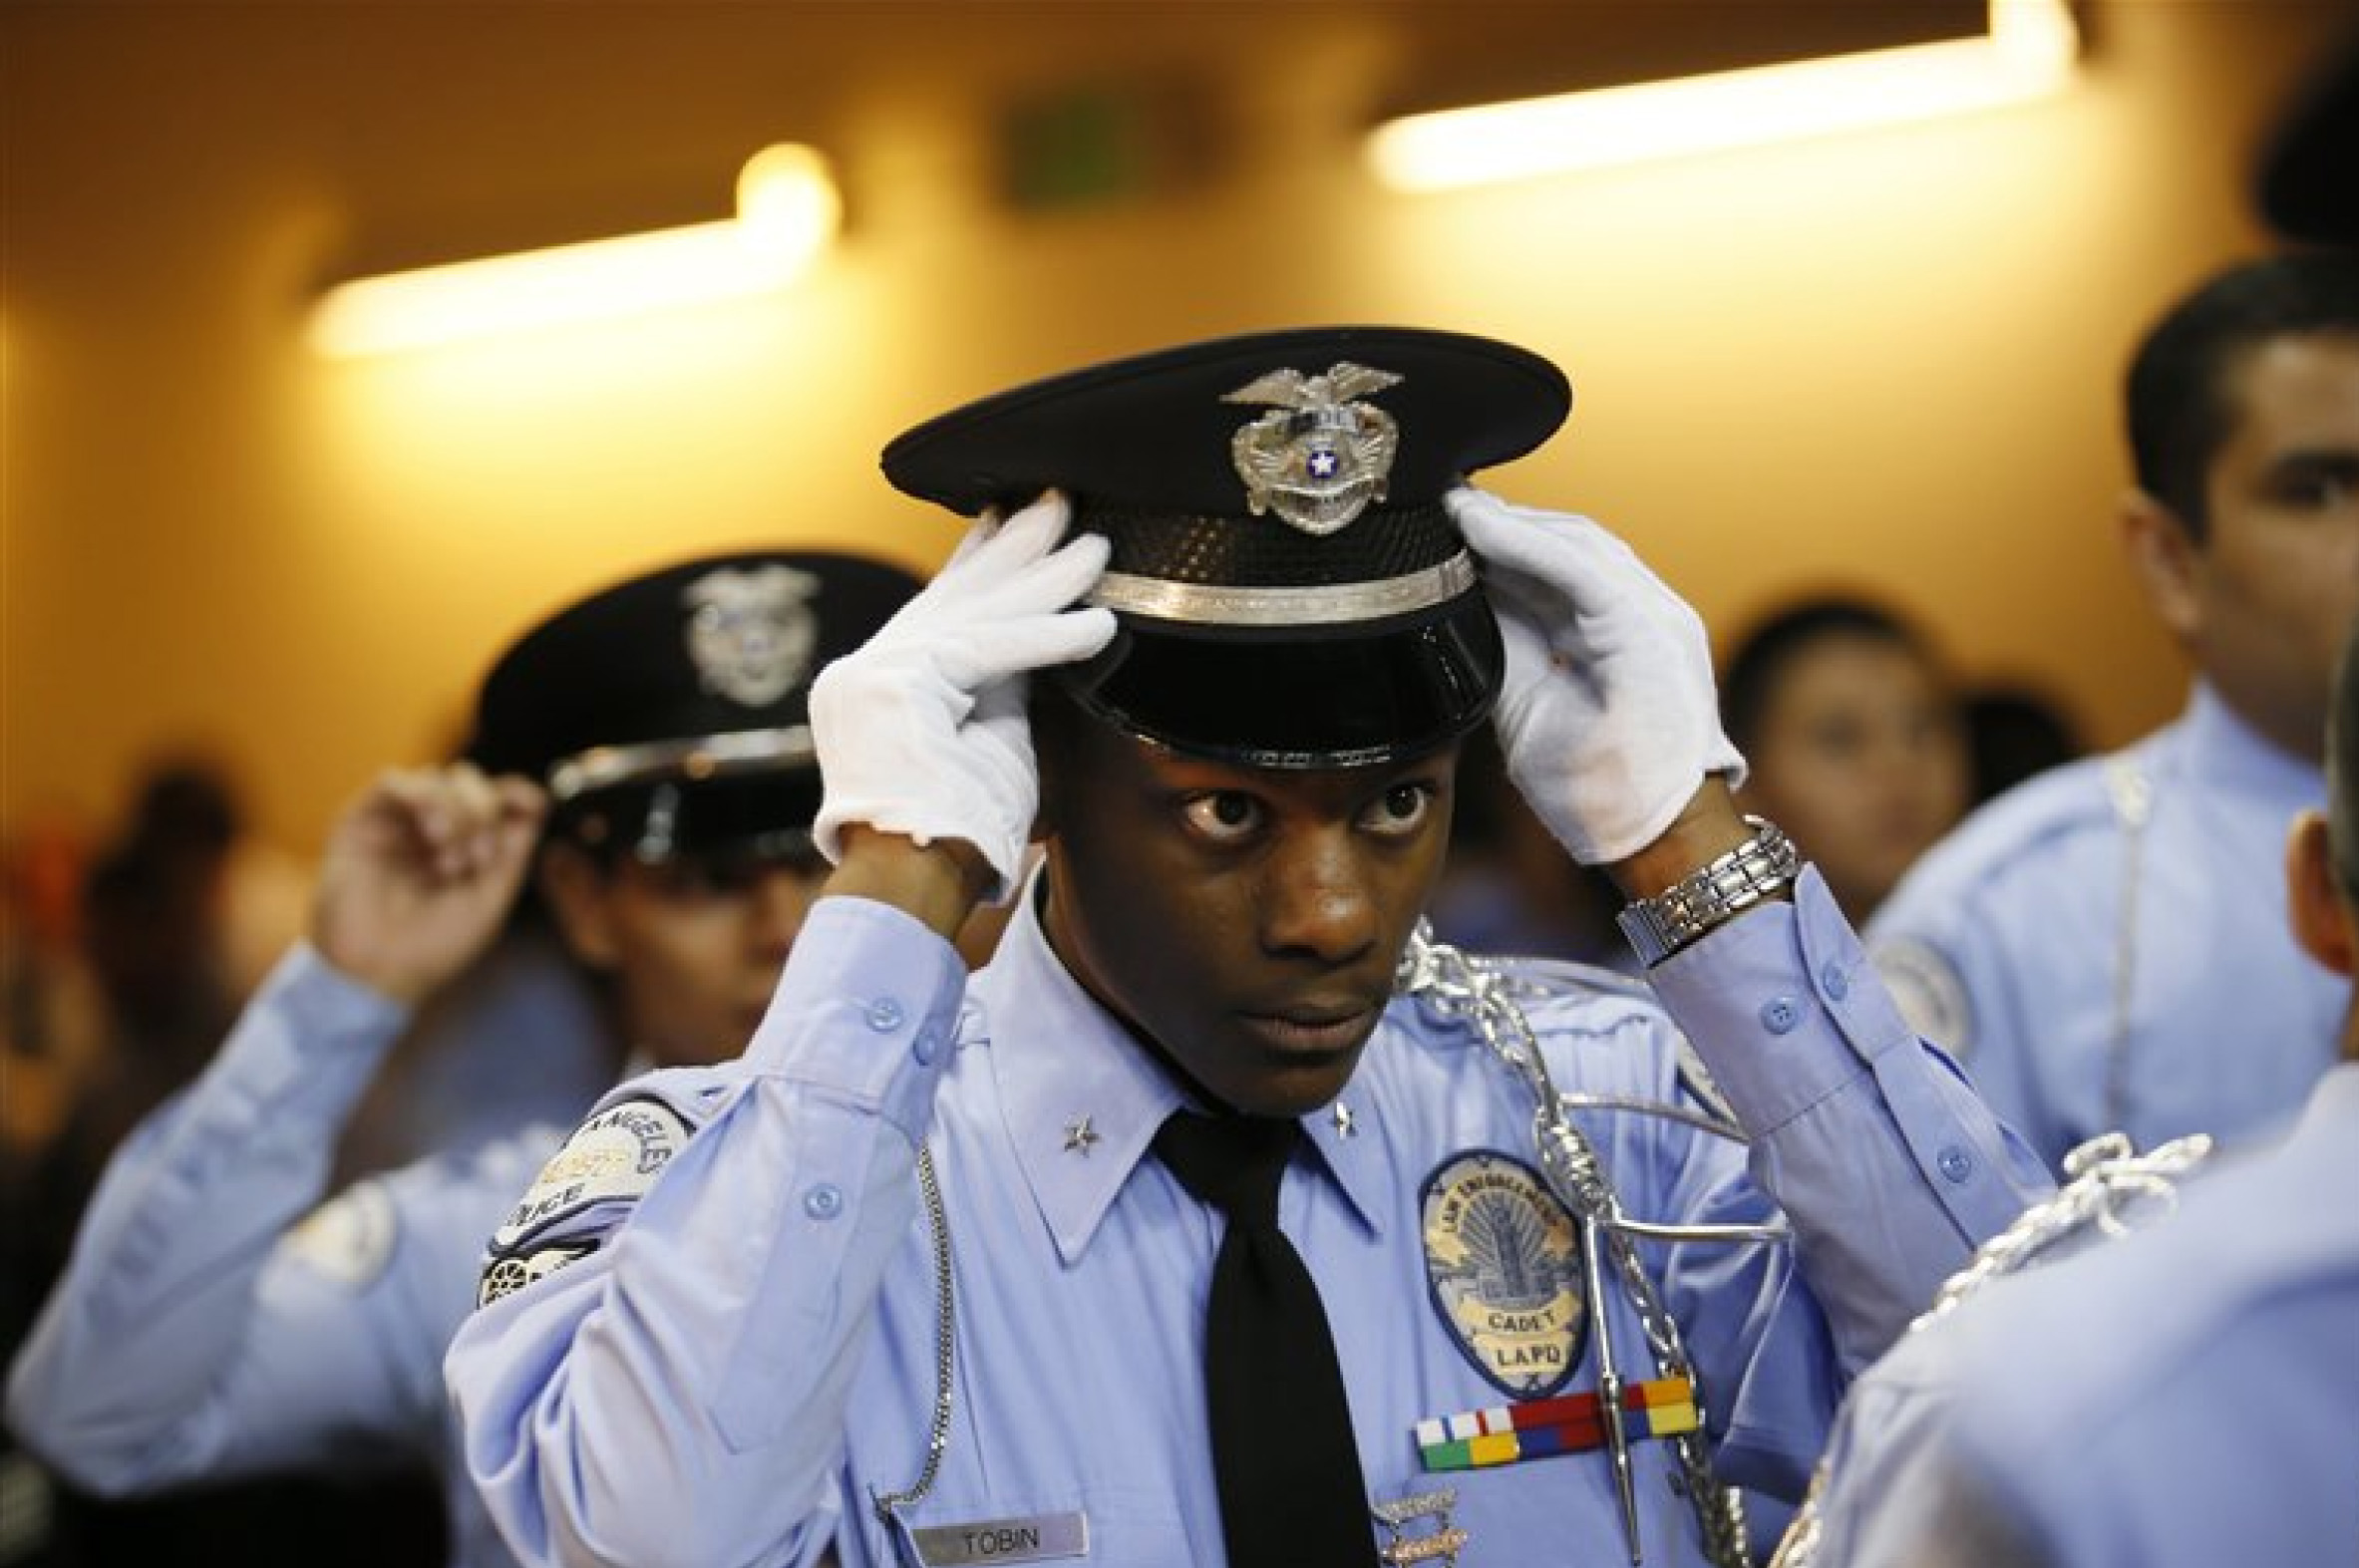 LAPD Cadet Commander adjusts his hat at the LAPD Cadet Program graduation, partly funded by $1.5M in grants from the Ray Charles Foundation.